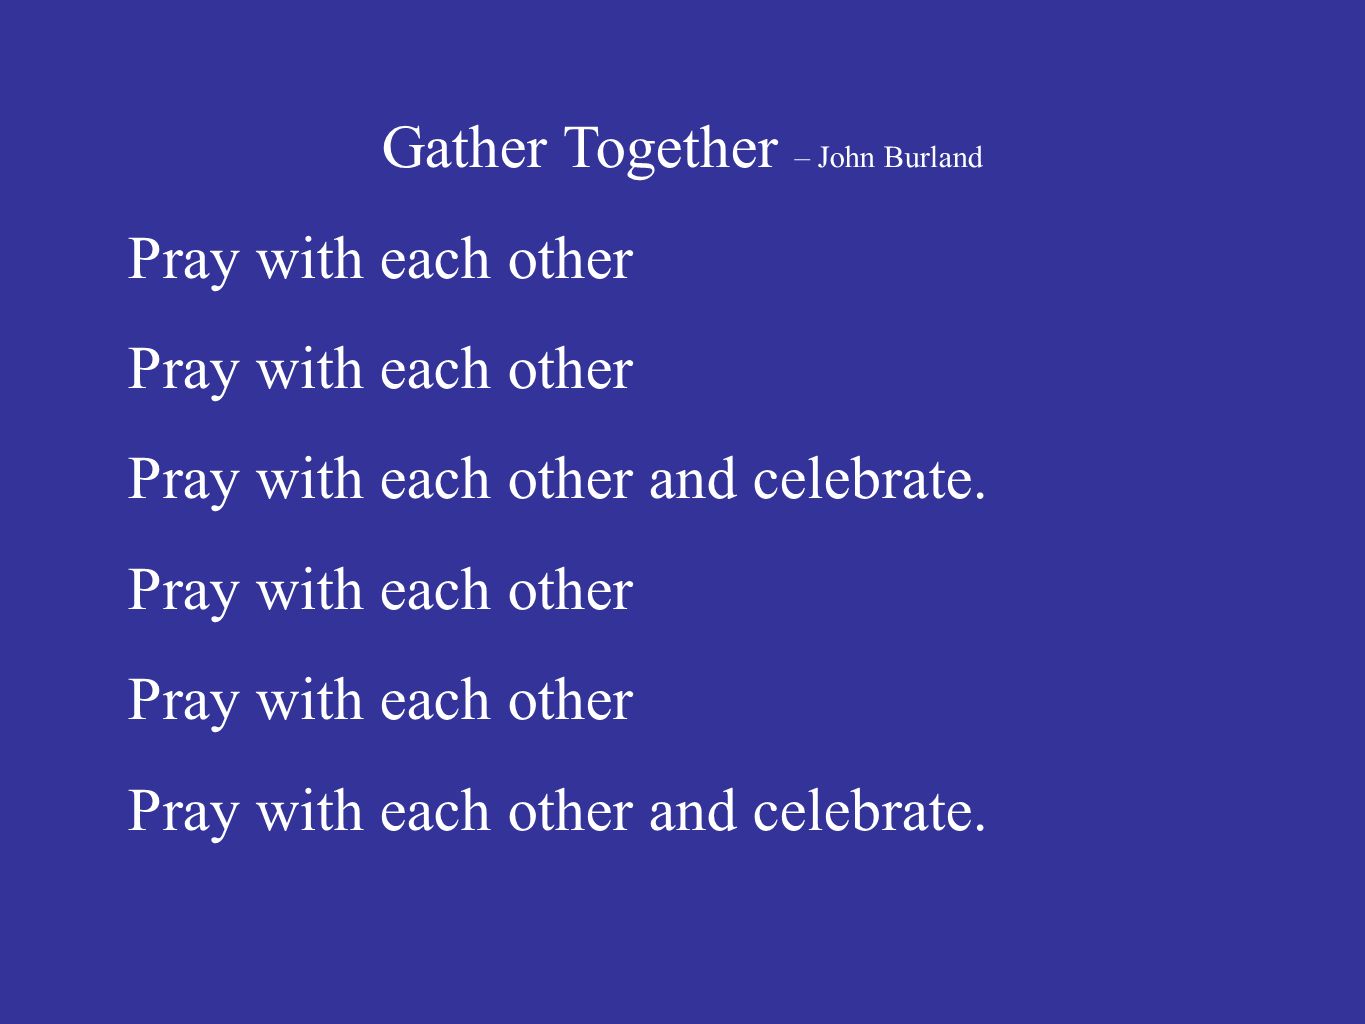 Gather Together – John Burland Pray with each other Pray with each other and celebrate.